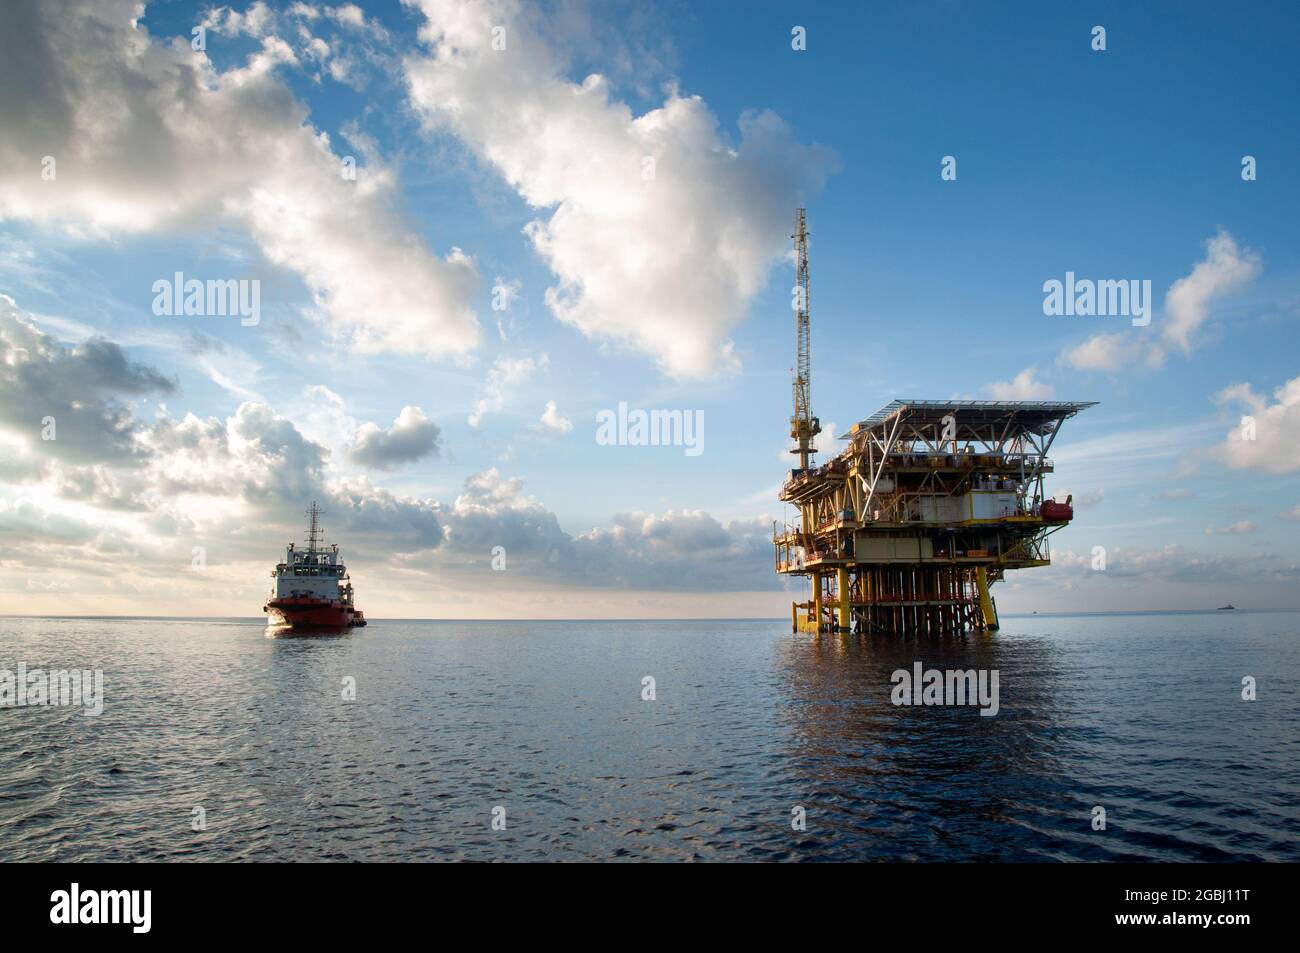 offshore platform drilling at sea during morning with offshore supply vessel Stock Photo